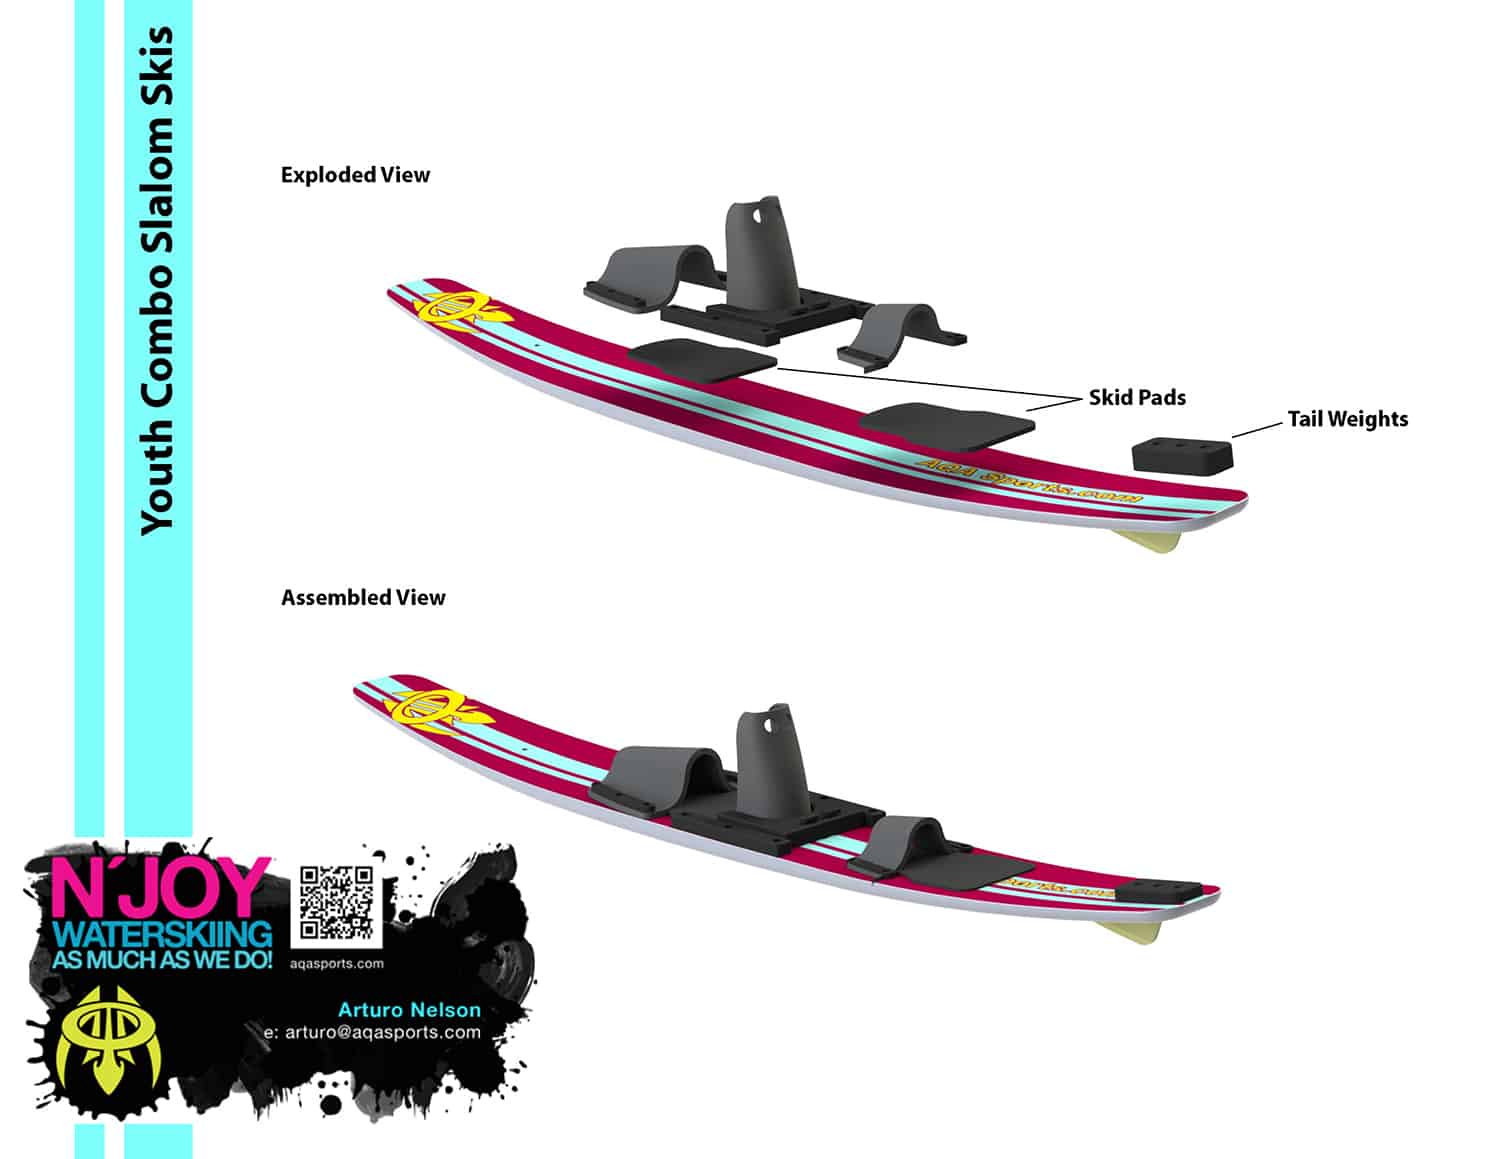 CAD rendering of youth slalom skis. Exploded view and side view of skis for assembly.